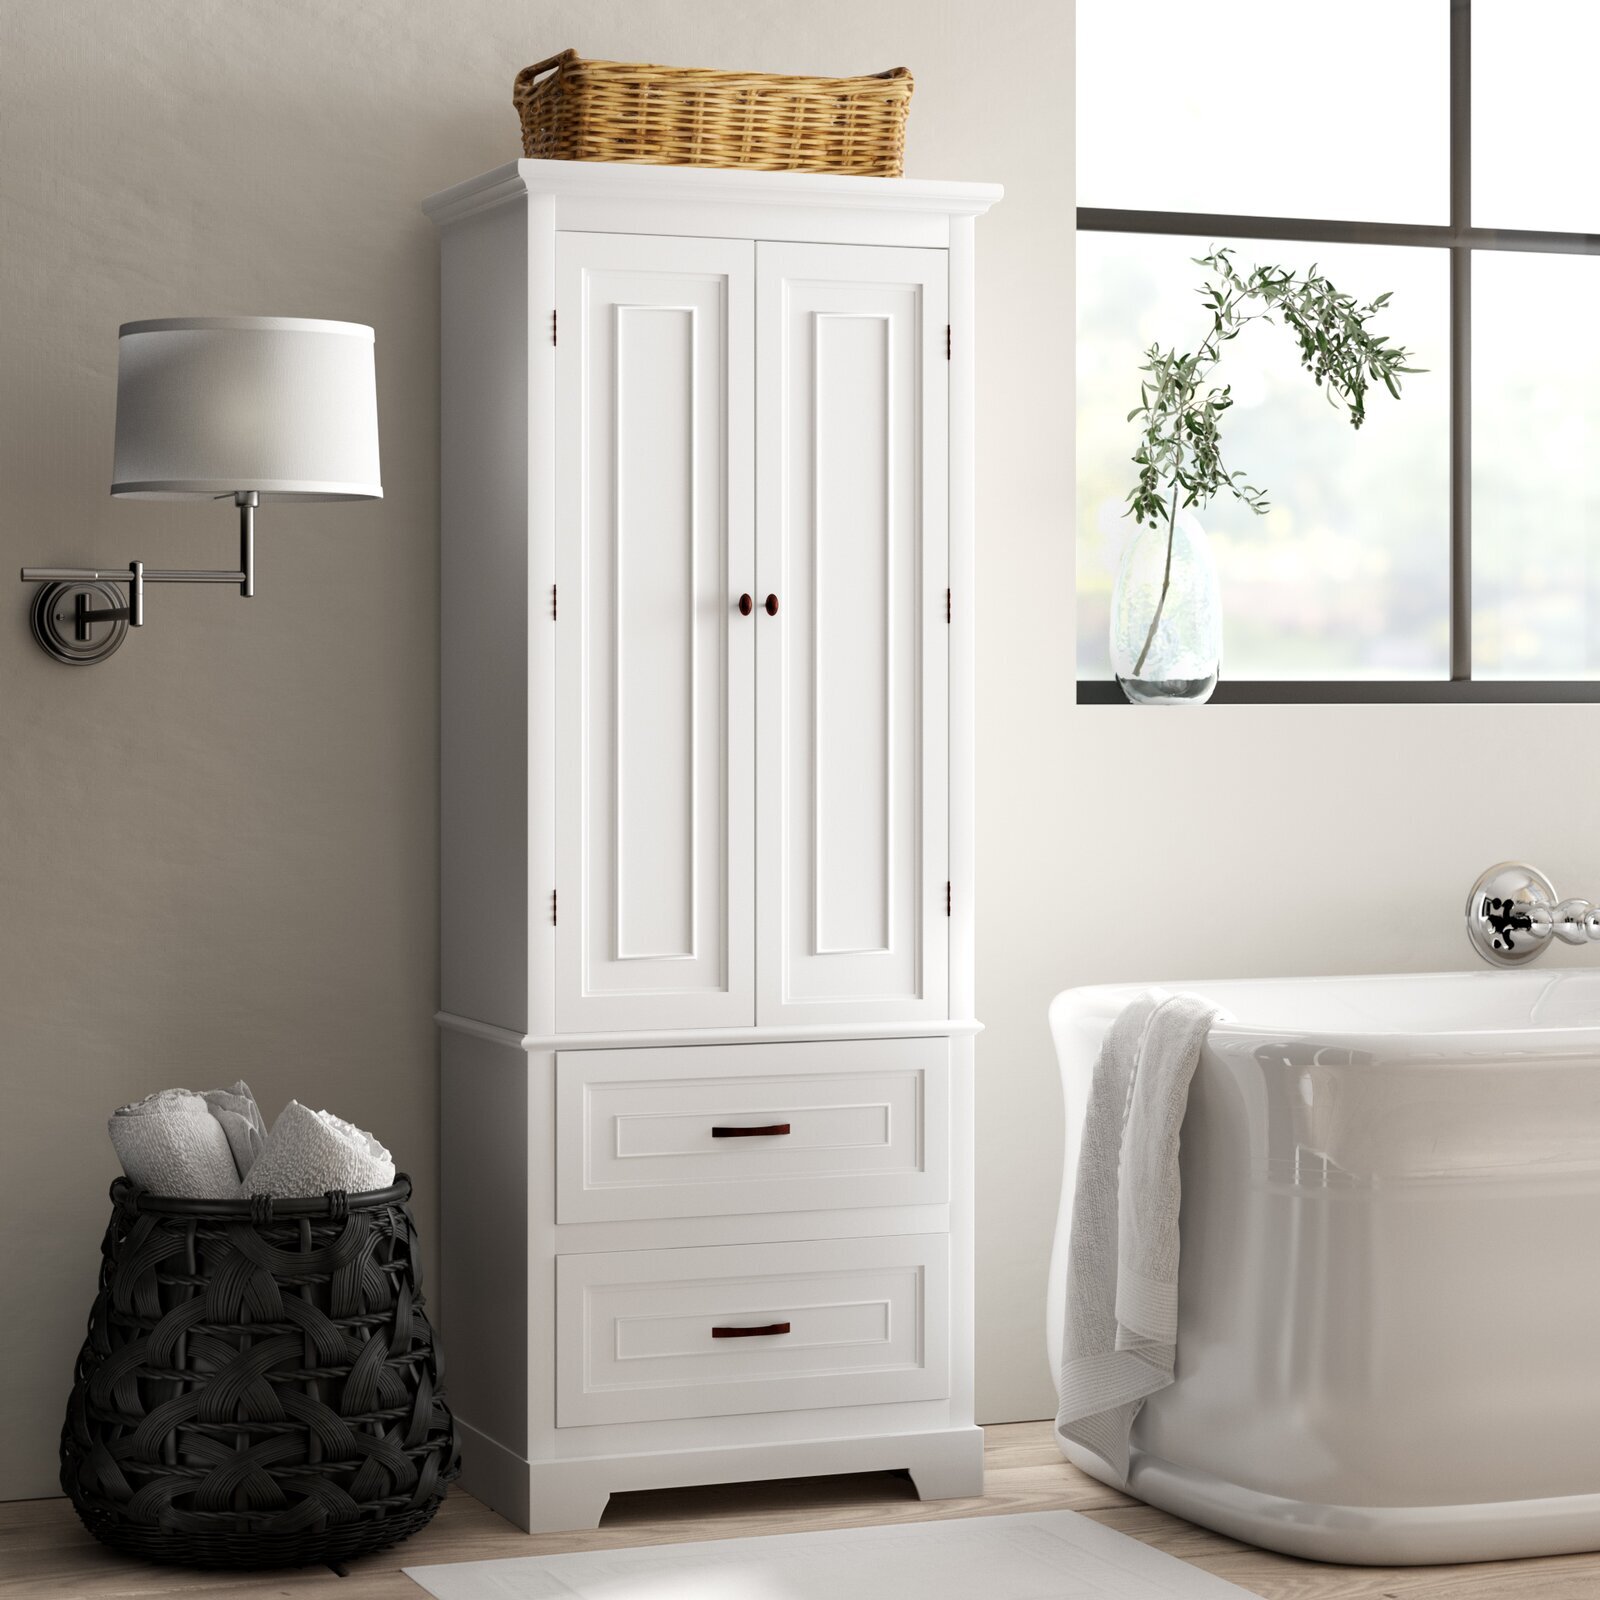 A larger tower cabinet for bathroom linens and more